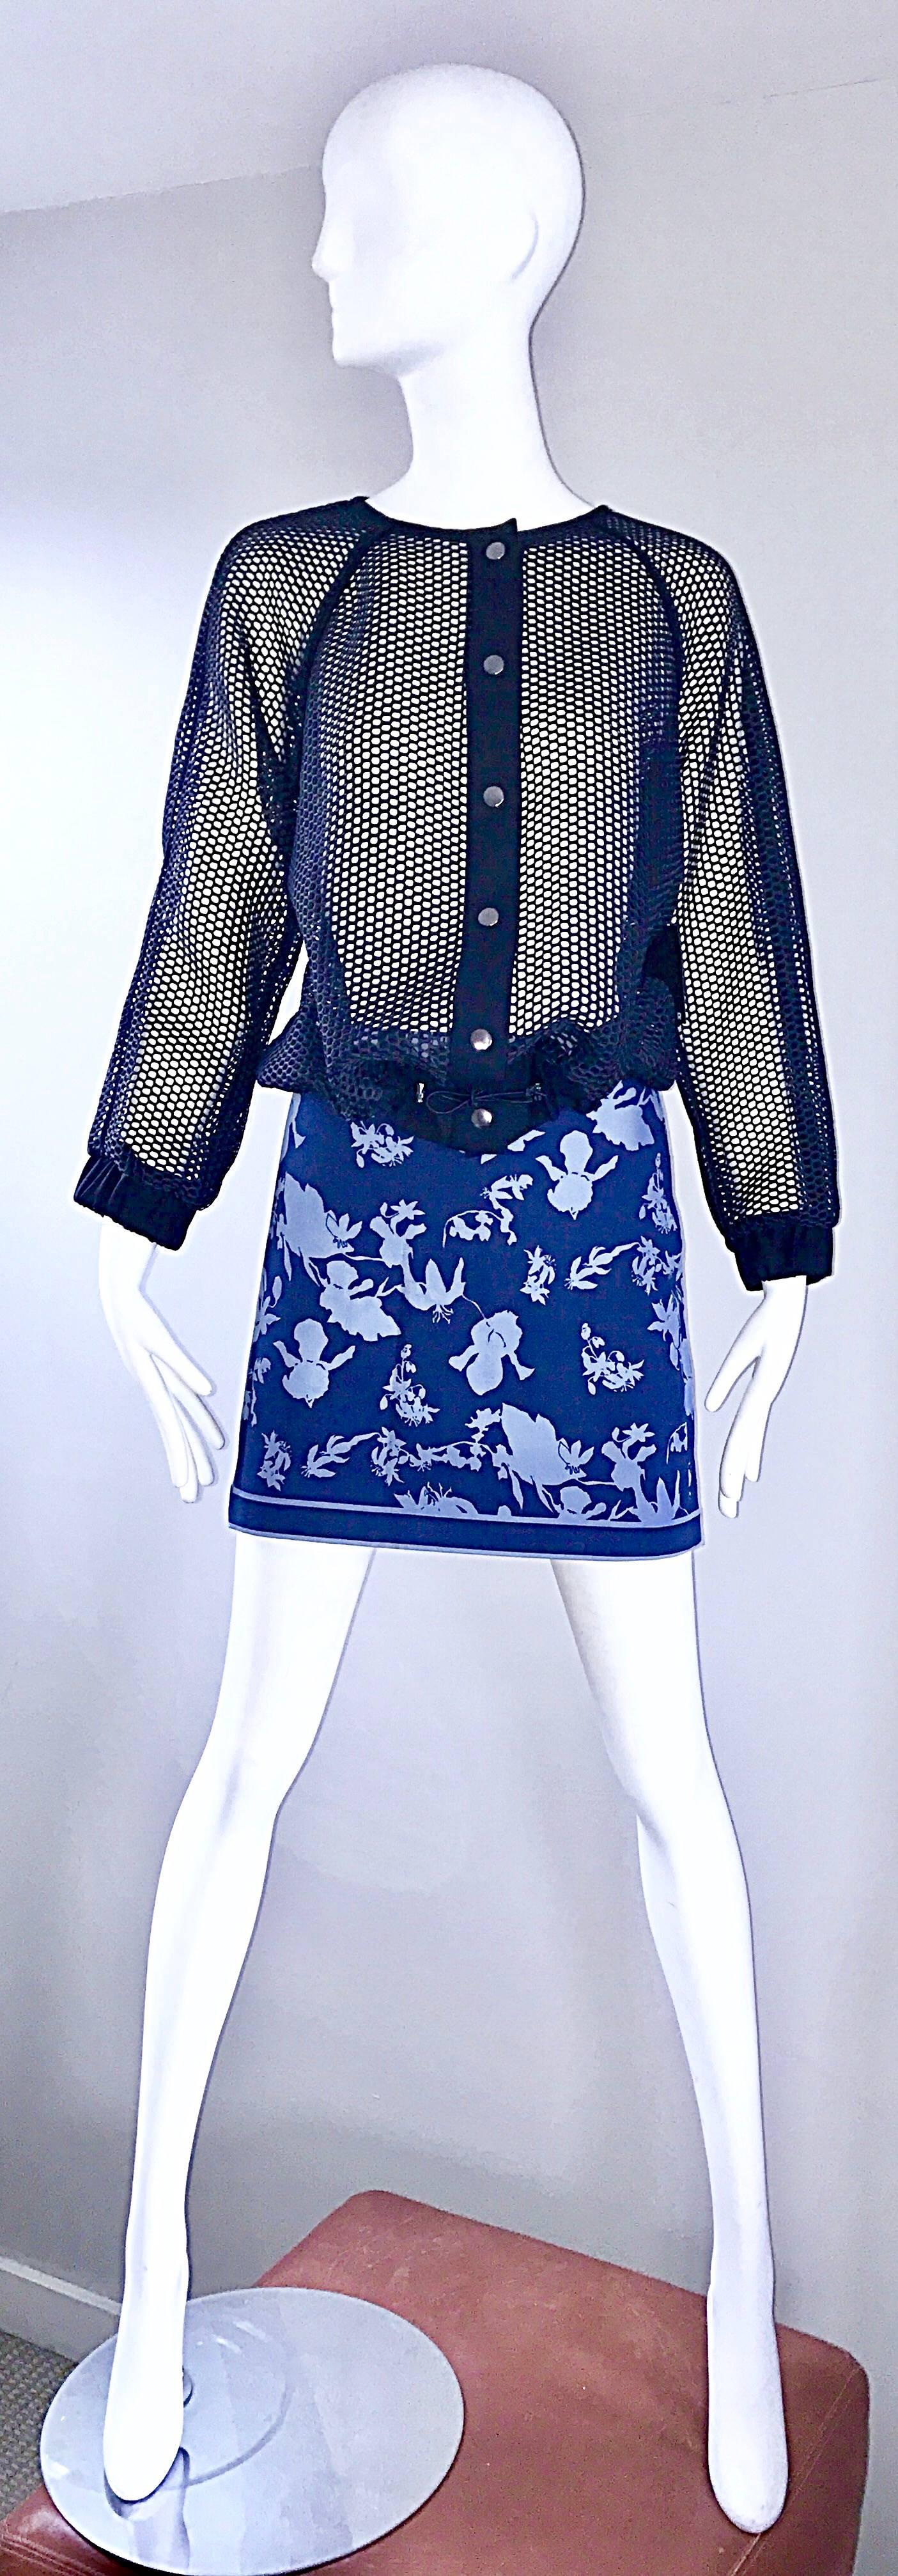 New Michael Kors Collection Size 8 Navy + Light Blue Nautical Cotton Mini Skirt In Excellent Condition For Sale In San Diego, CA